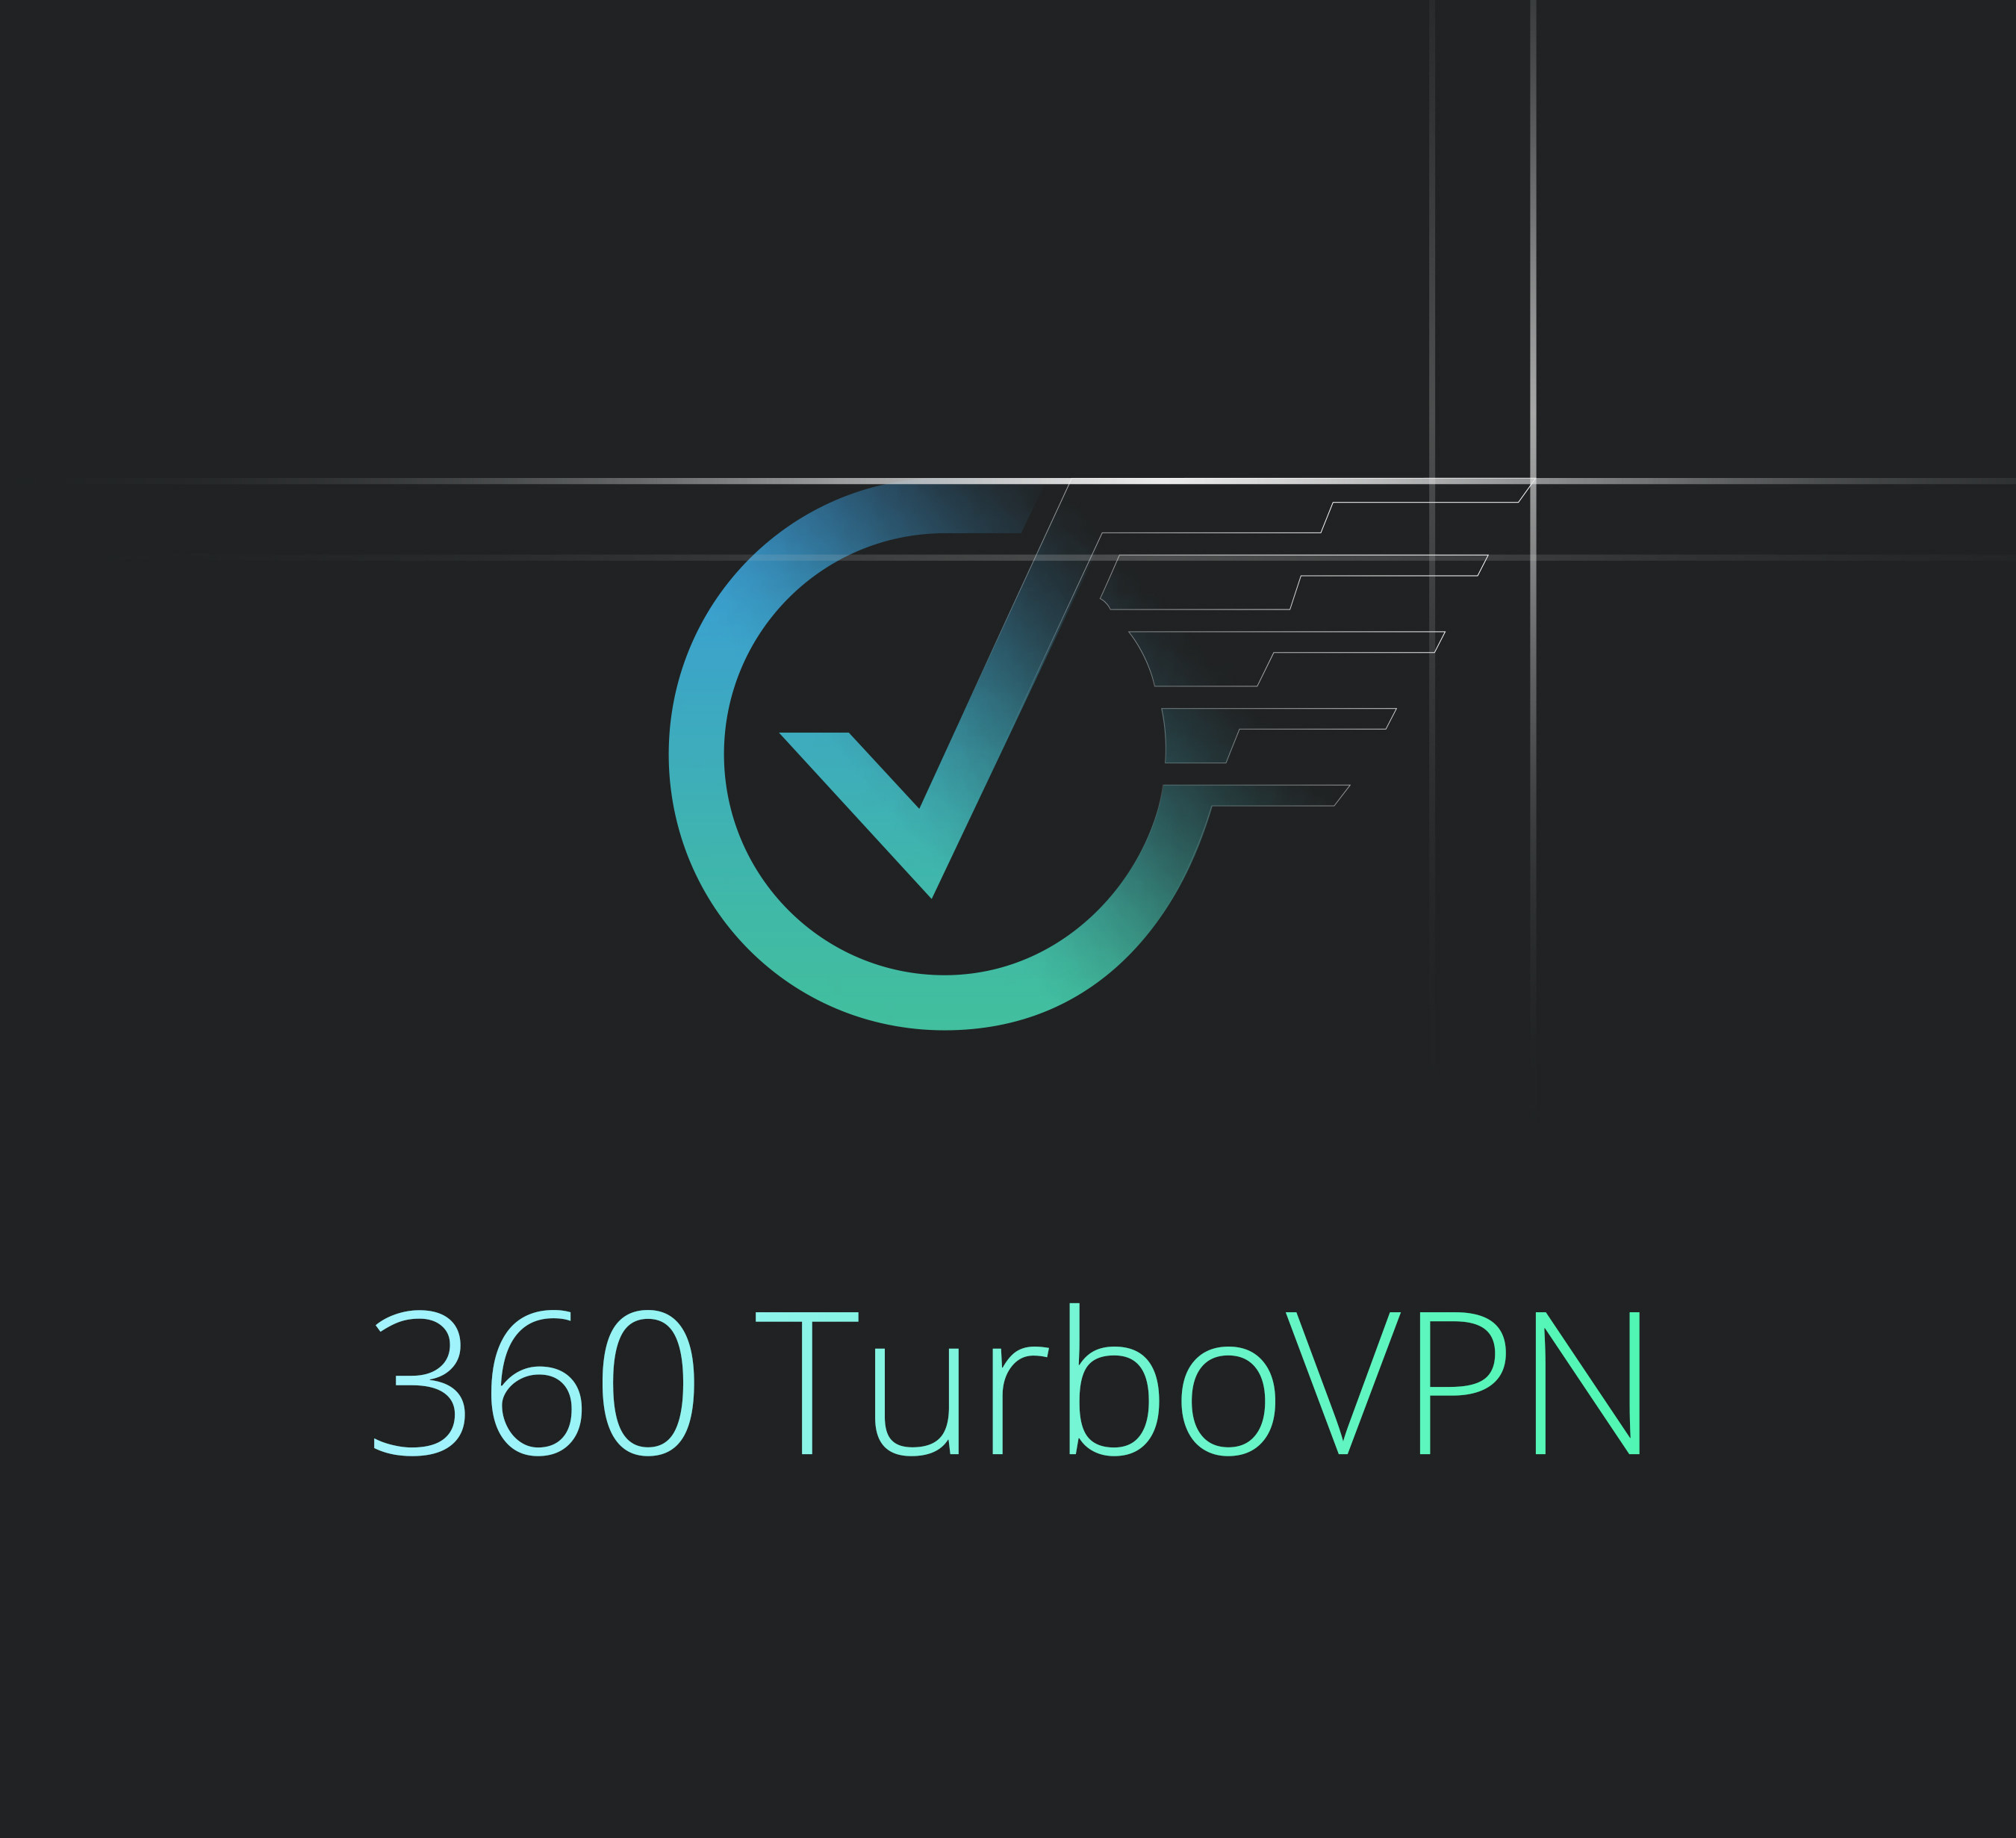 360 TurboVPN Newly Released